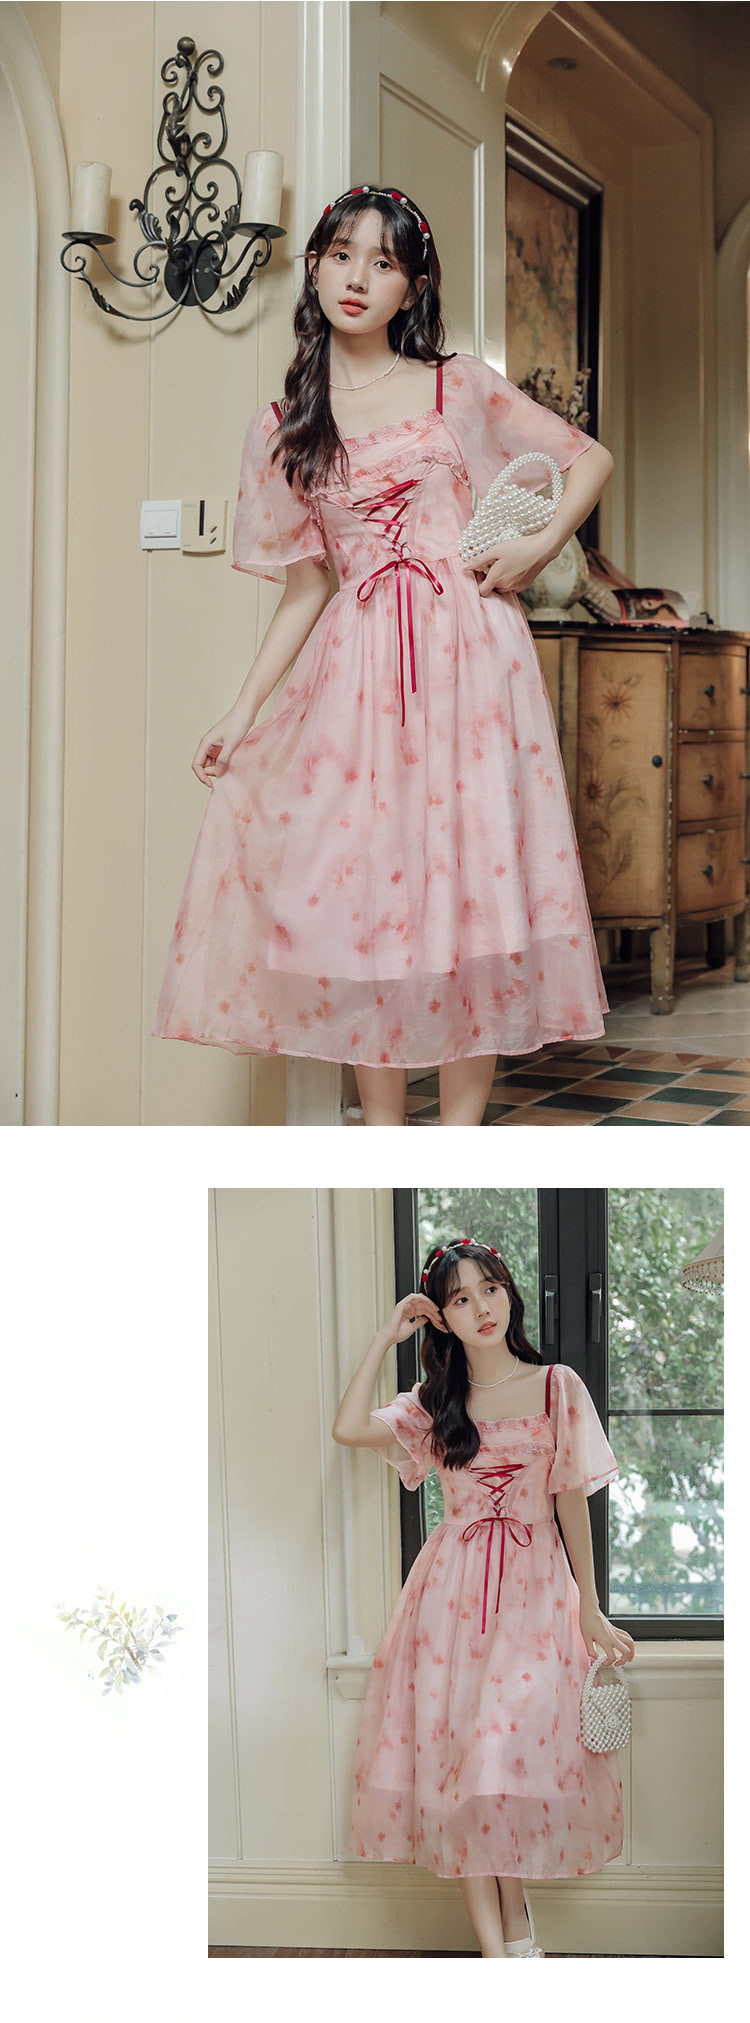 Square-Neck-Peach-Pink-Floral-Print-Dyed-Summer-Casual-Sun-Dress12